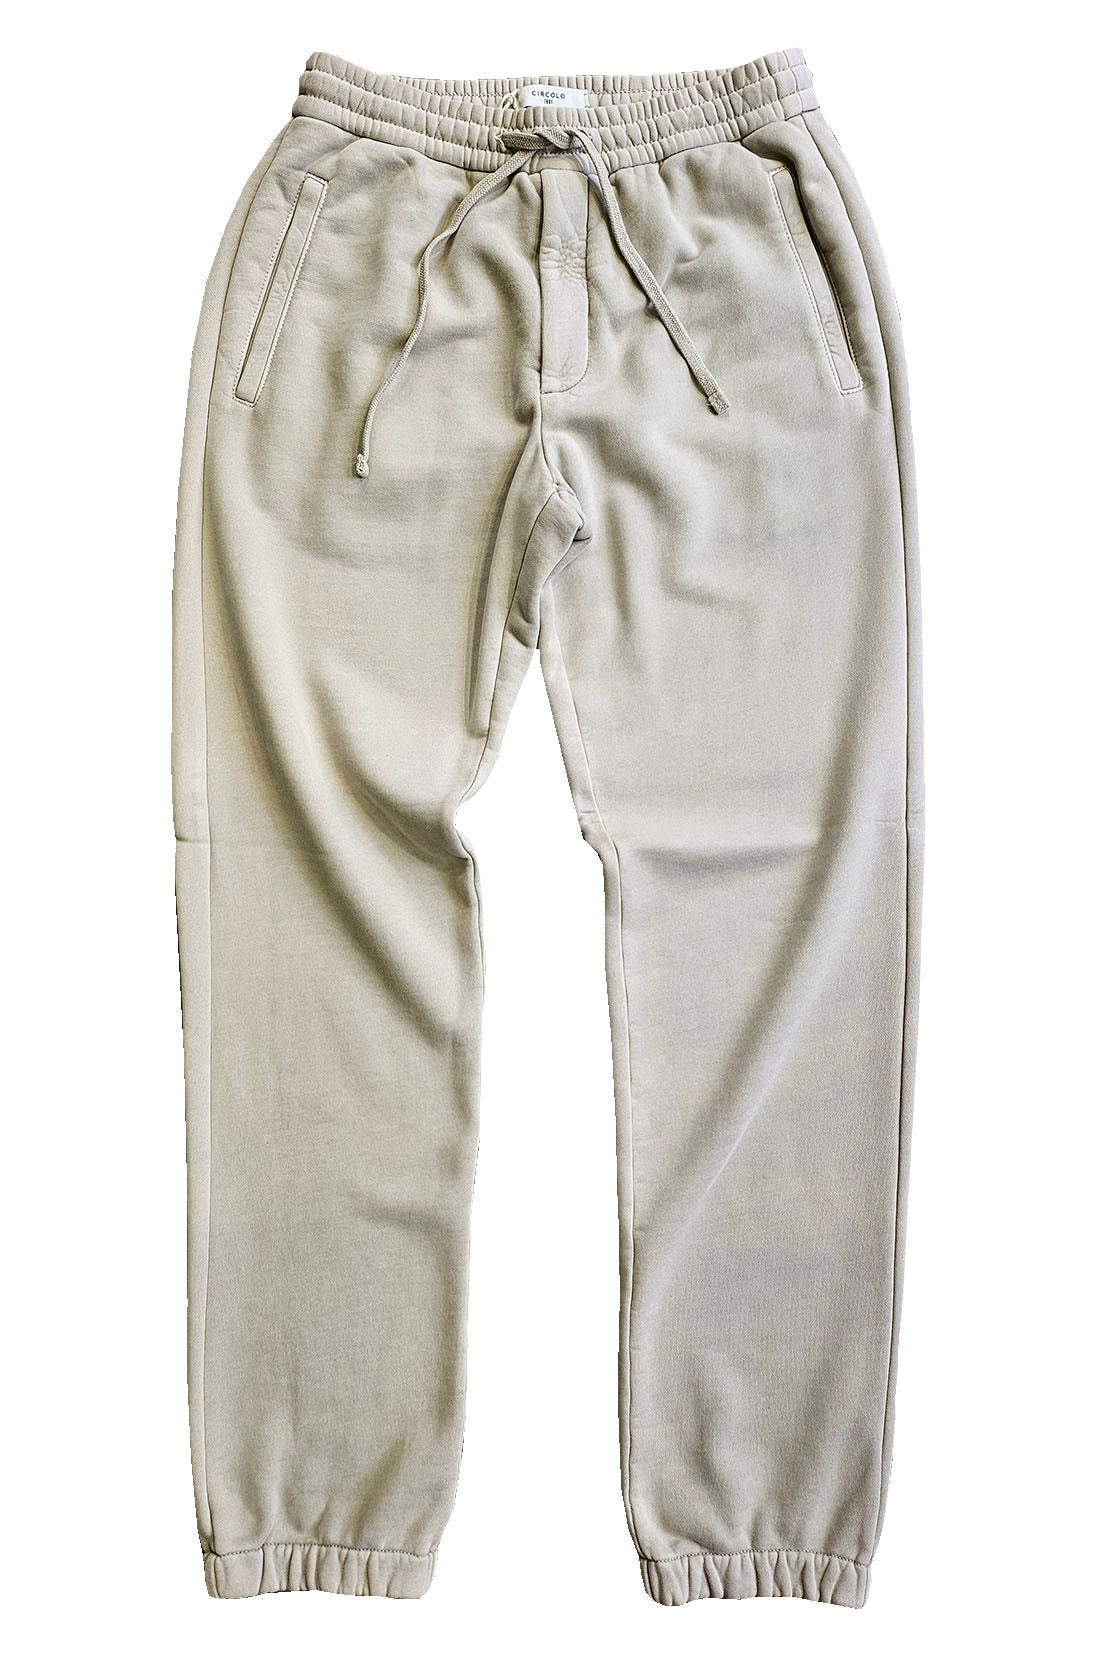 CIRCOLO - CN4028 Cashmere Touch Jogging Bottoms in Rainy Days Beige